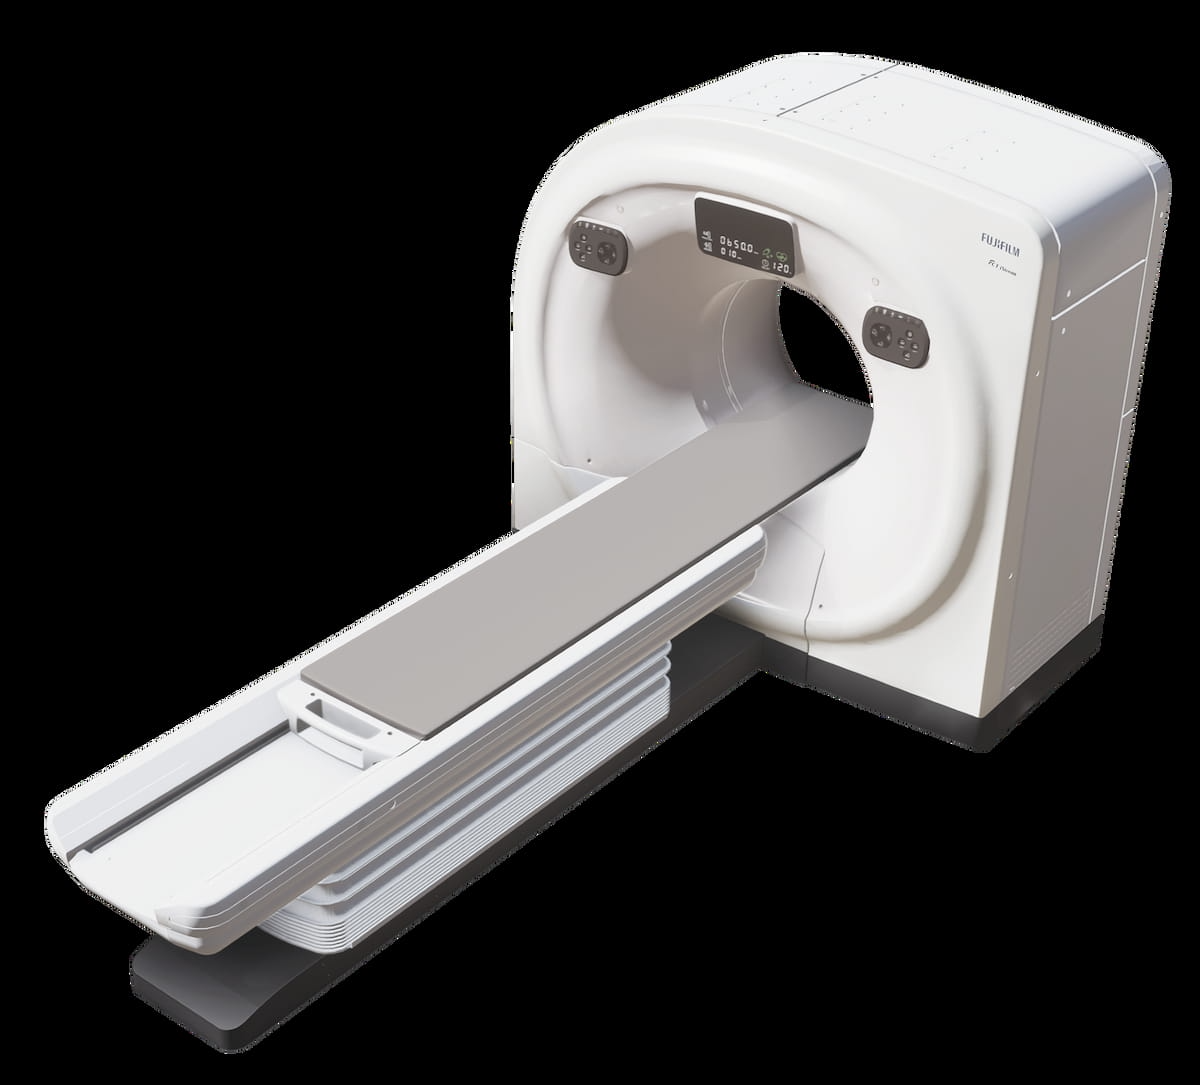 FDA Clears New 128-Slice CT System from Fujifilm